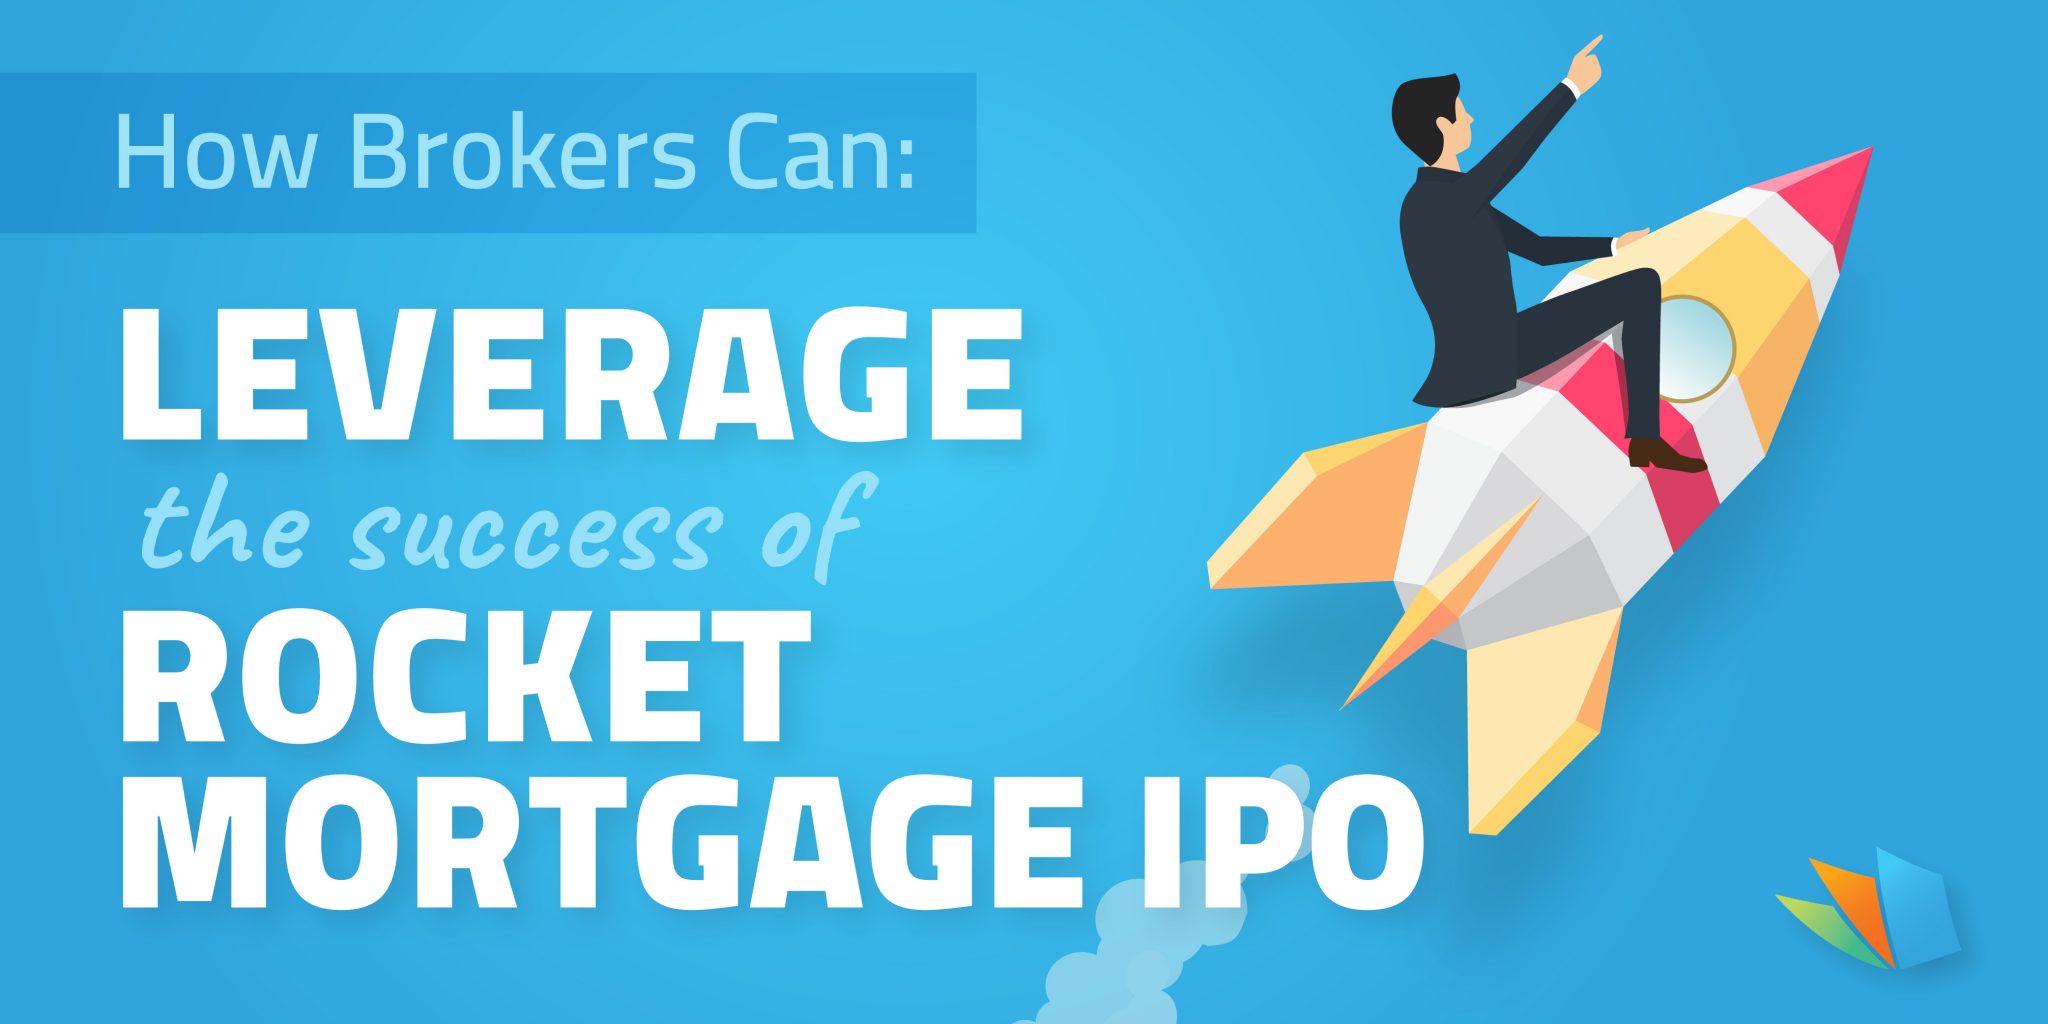 How Brokers Can Leverage the Success of Rocket Mortgage IPO